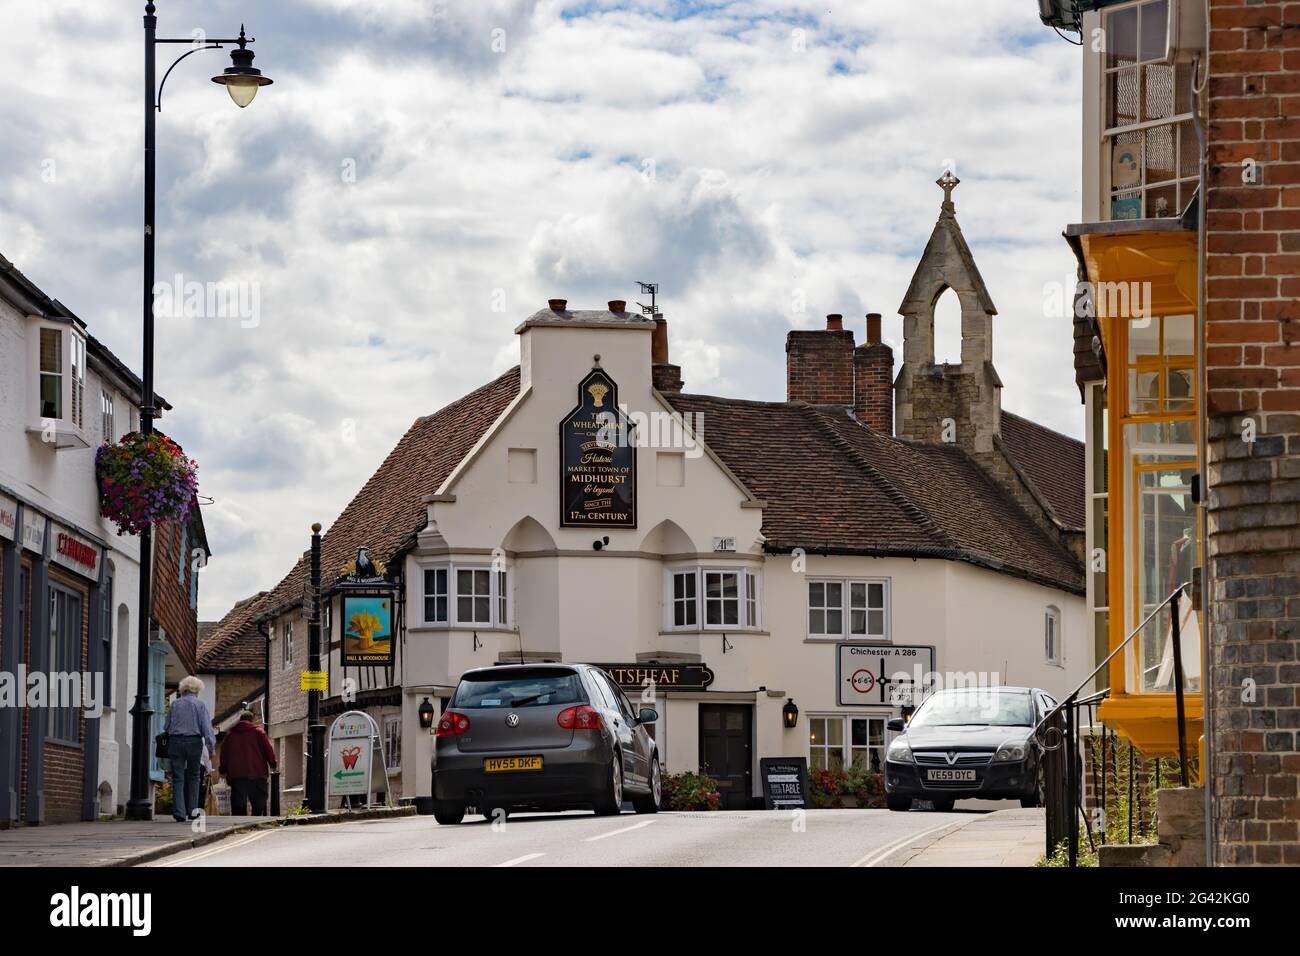 MIDHURST, WEST SUSSEX/UK - SEPTEMBER 1 : View of the Wheatsheaf public house in Midhurst, West Sussex on September 1, 2020. Two Stock Photo